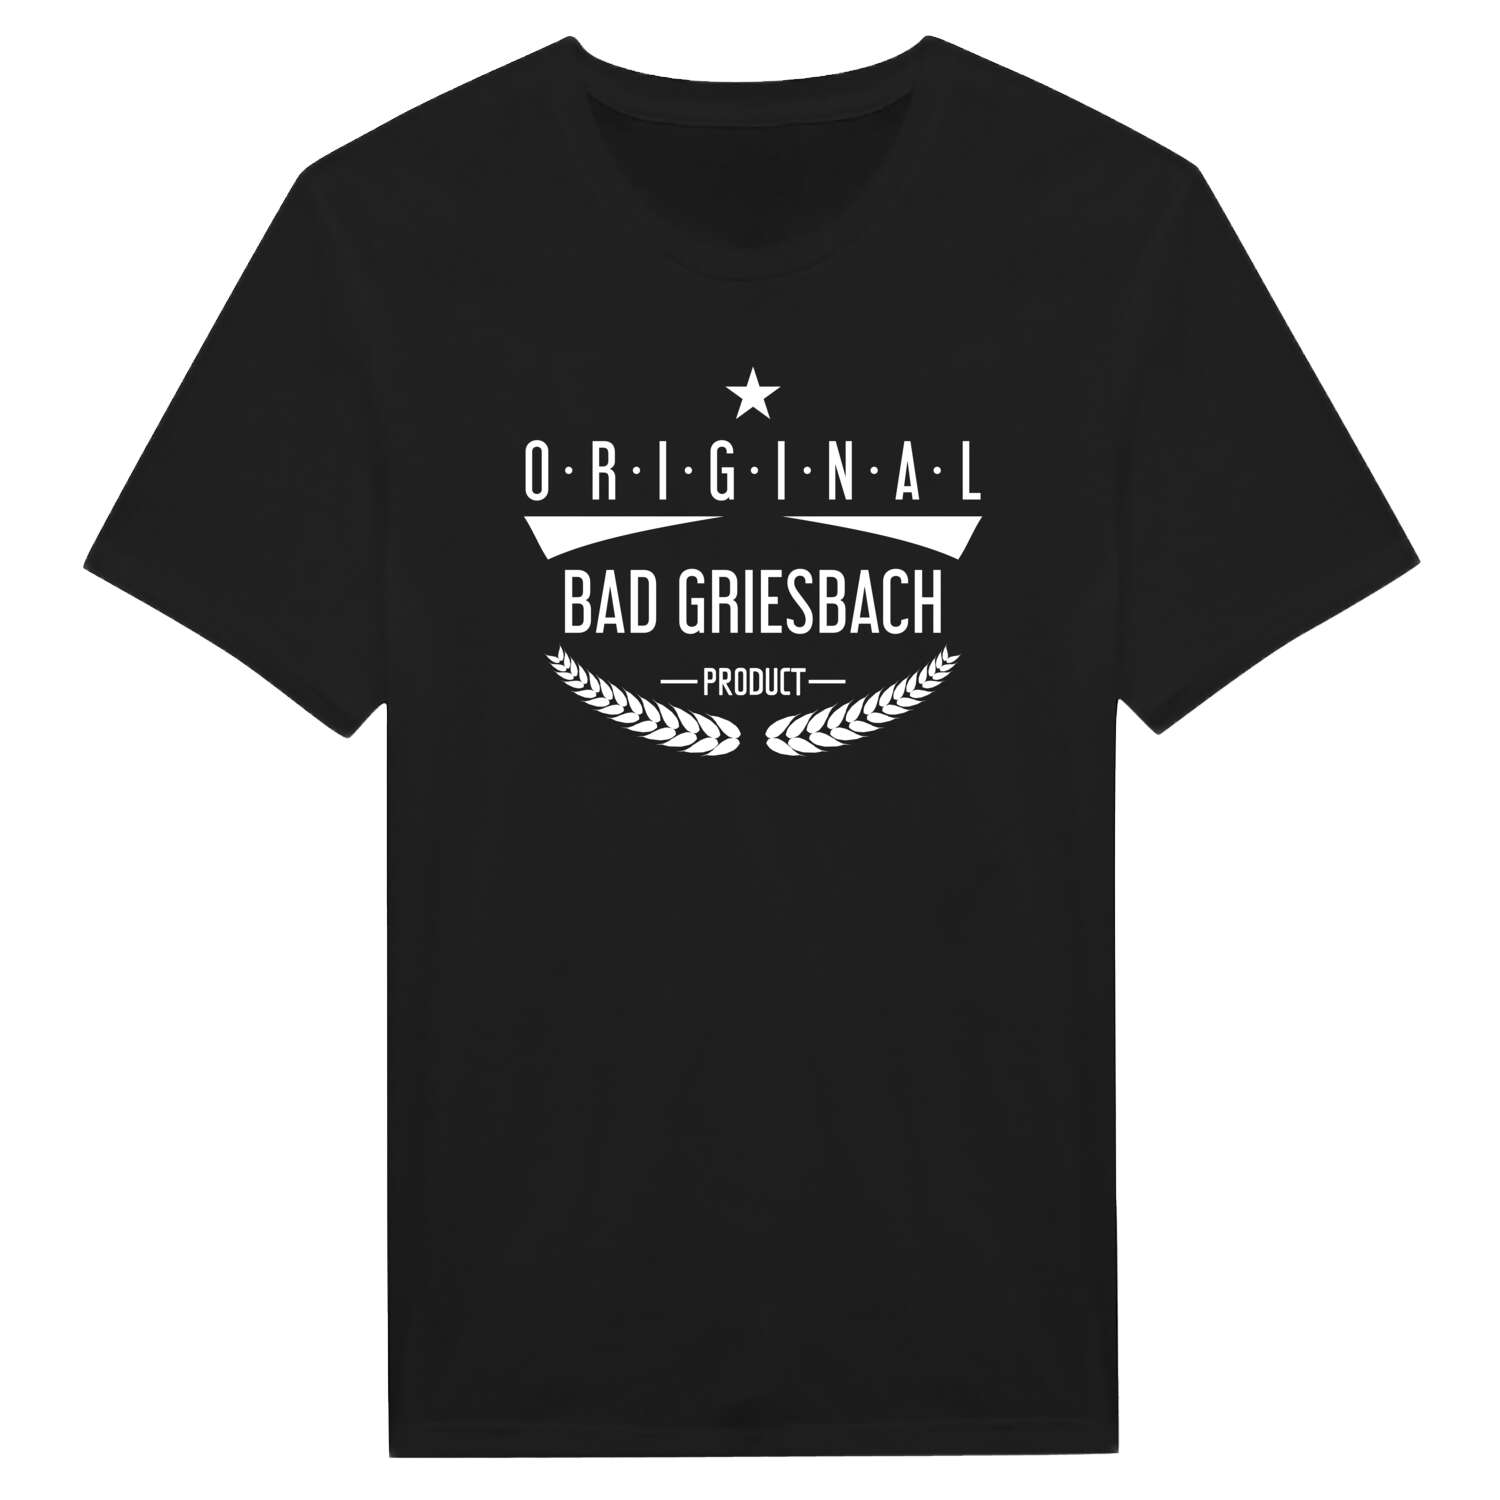 Bad Griesbach T-Shirt »Original Product«